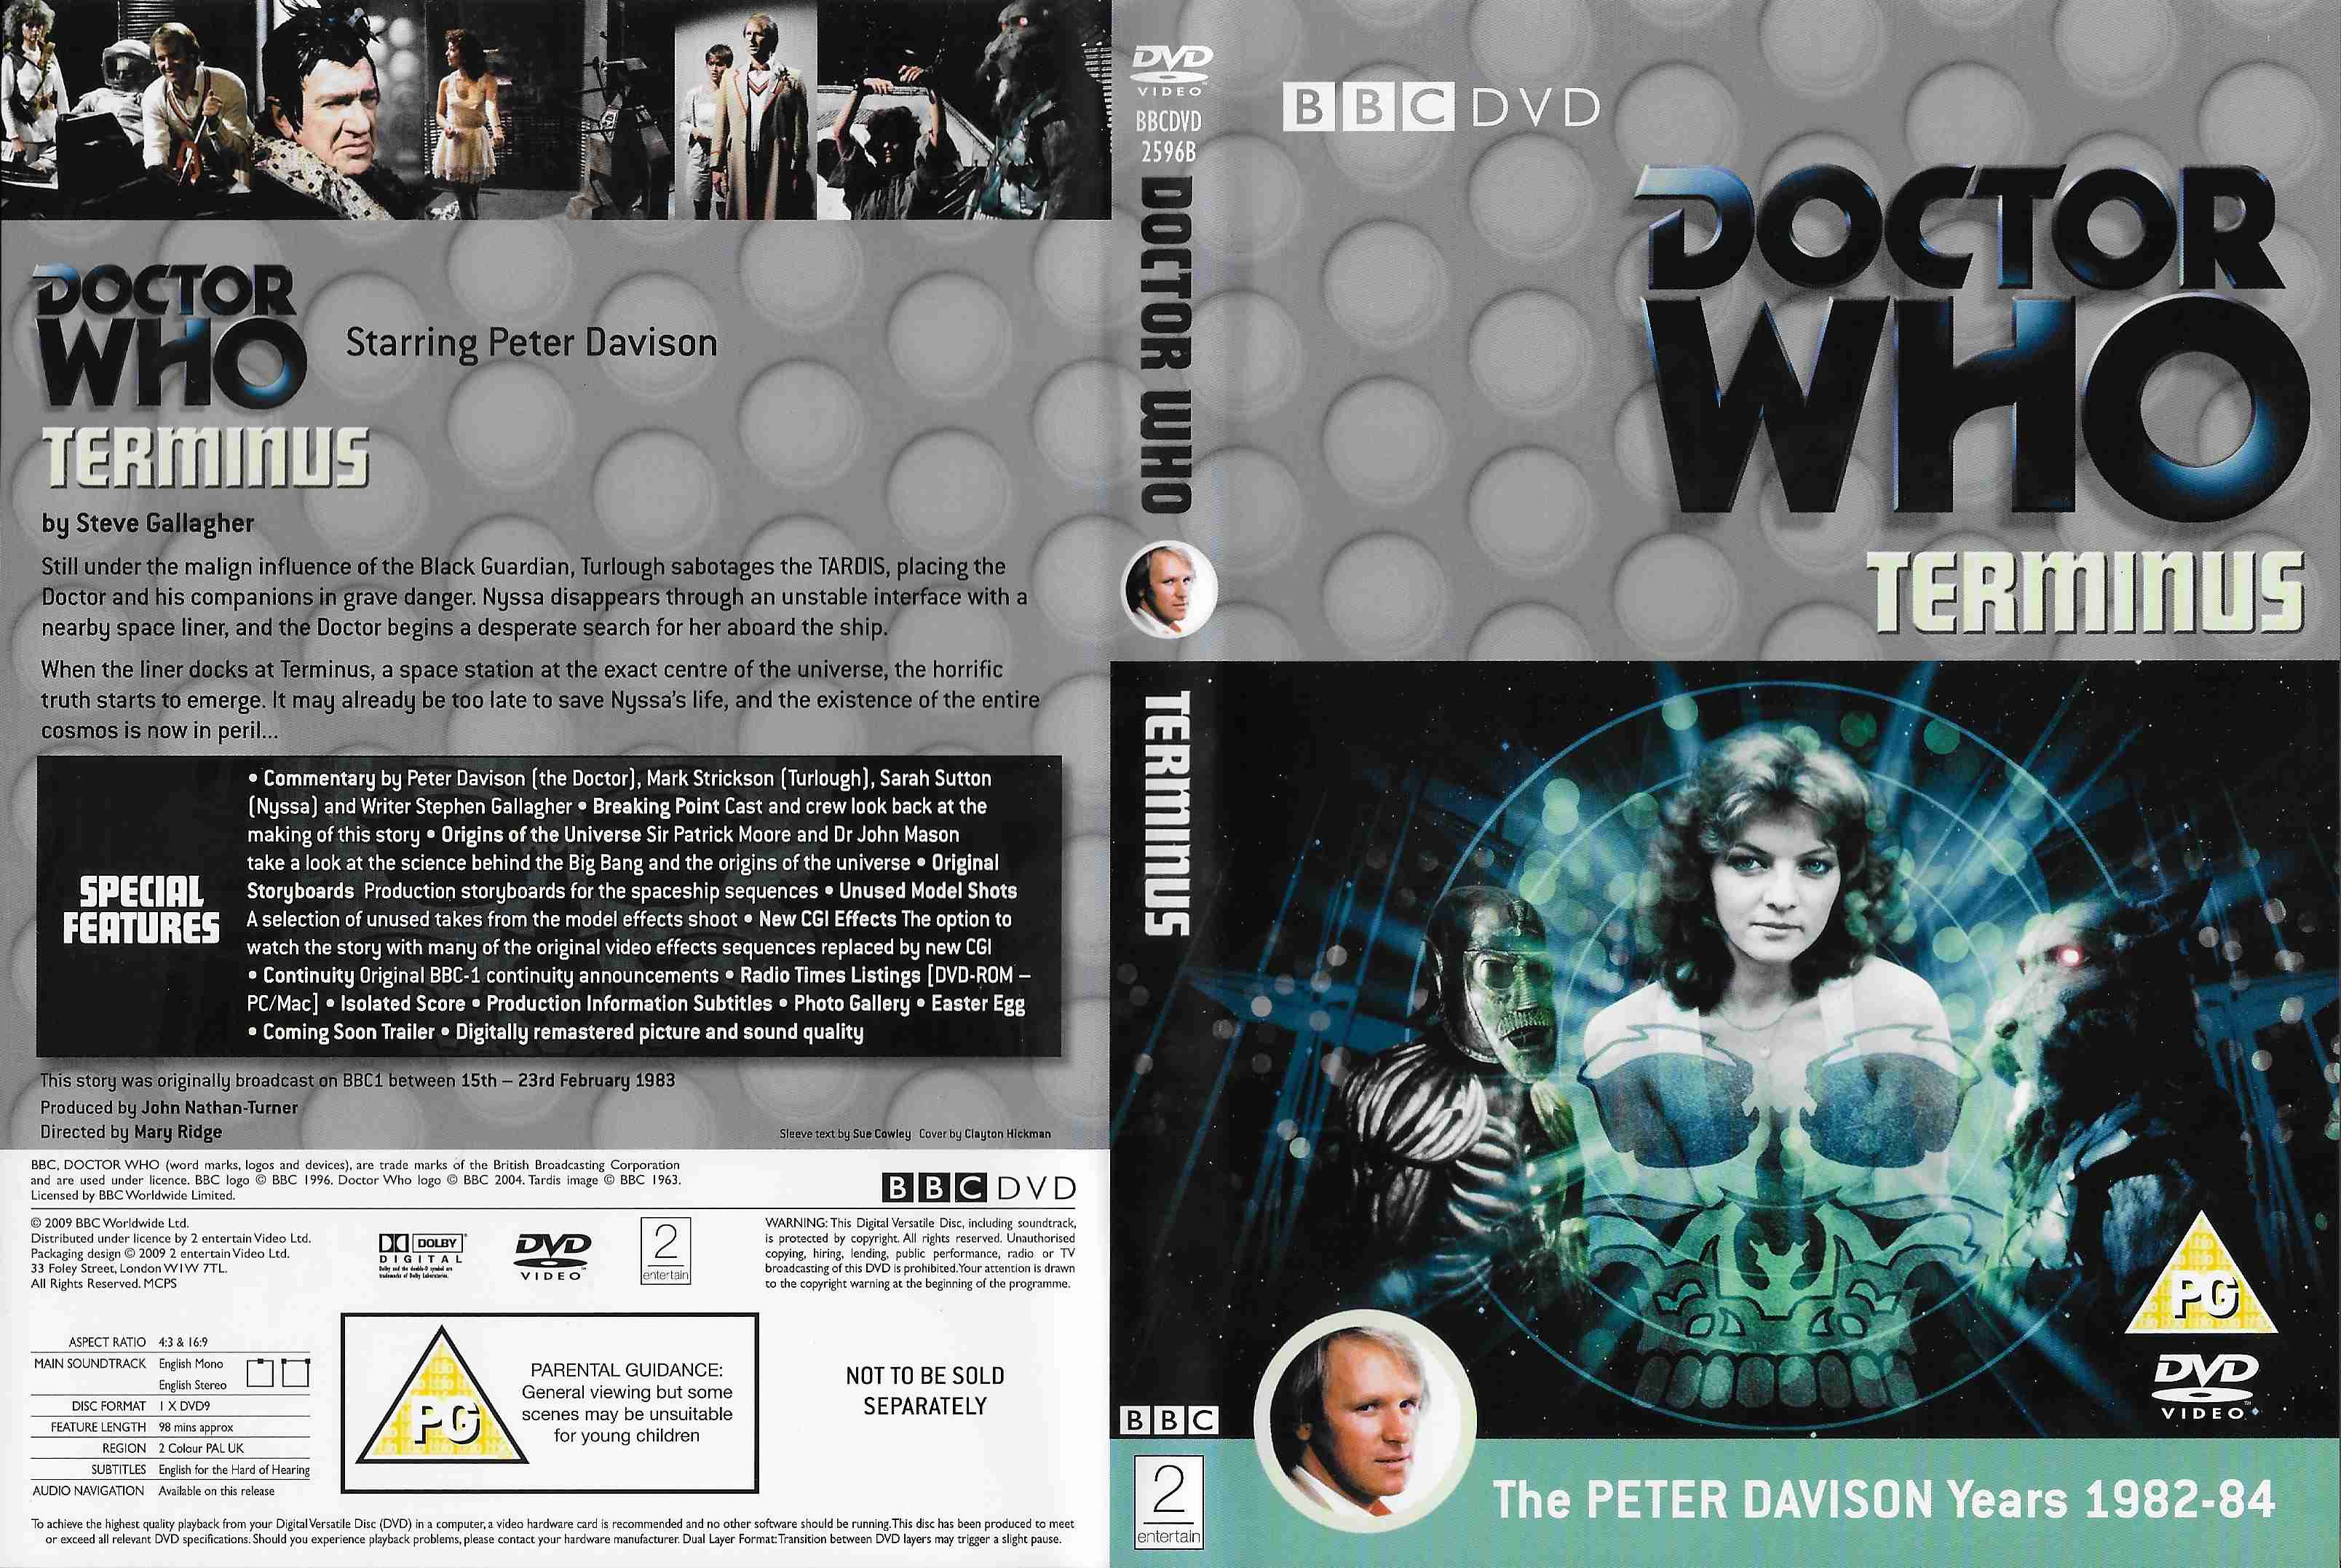 Picture of BBCDVD 2596B Doctor Who - Terminus by artist Steve Gallagher from the BBC records and Tapes library